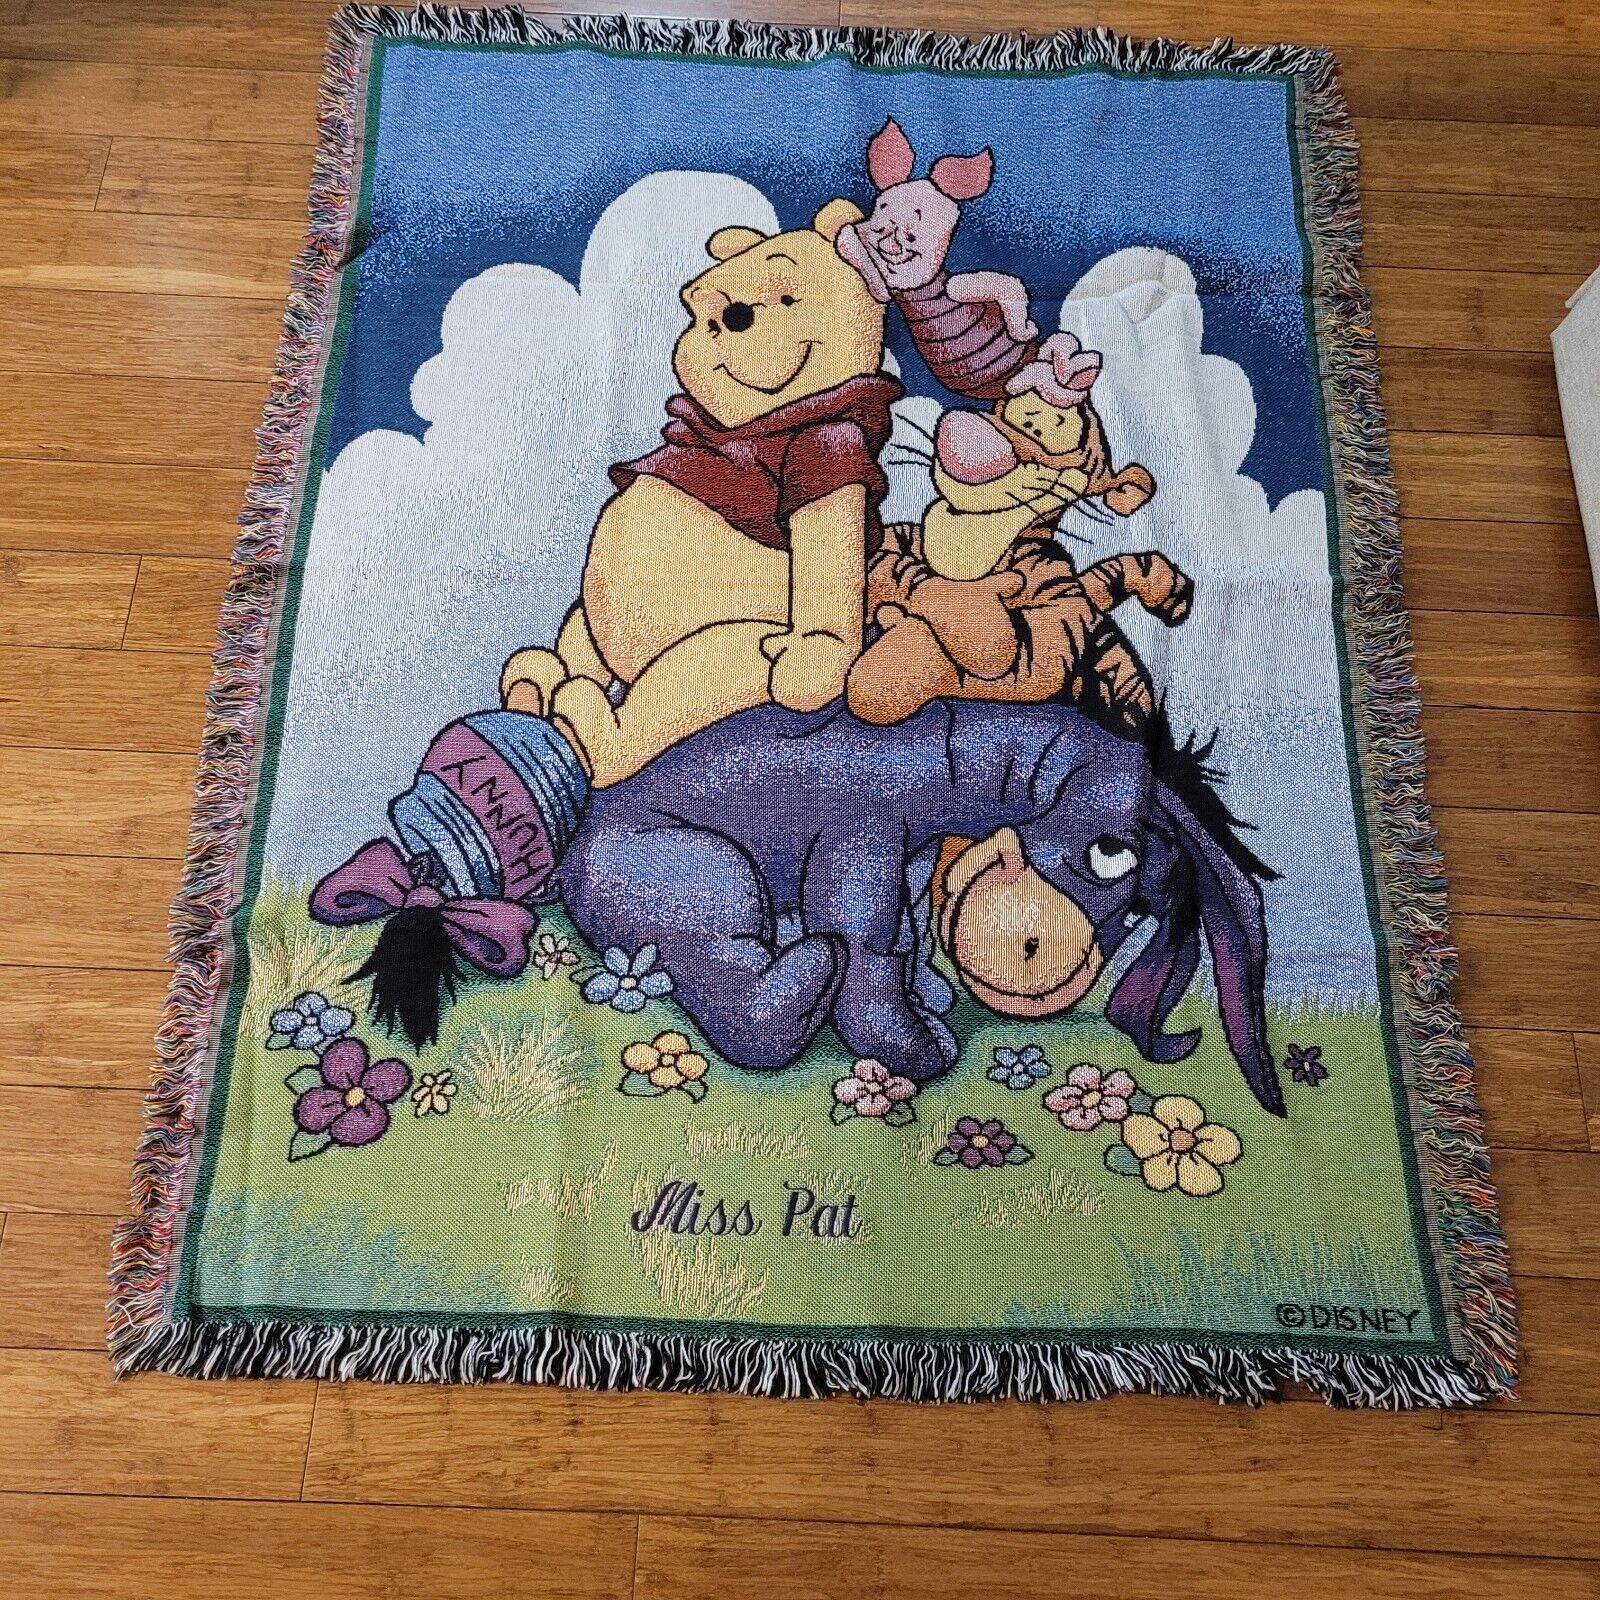 Vintage Winnie the Pooh Tapestry Blanket Disney Classic Pooh MADE IN USA 53X42